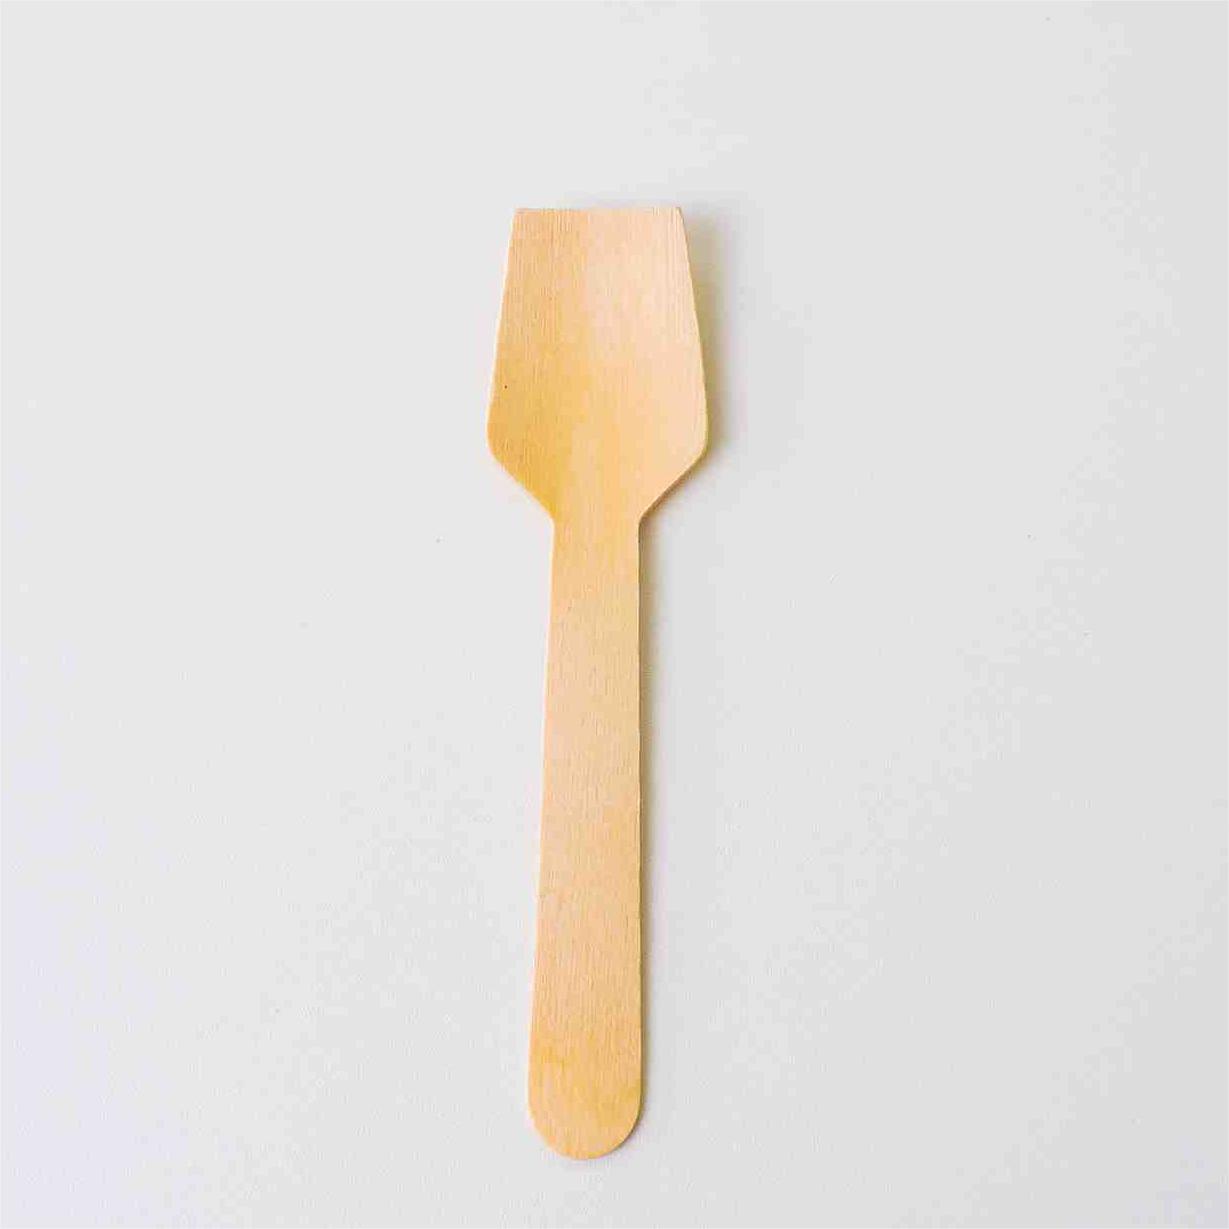 Environmentally Friendly Biodegradable Wooden Spoon